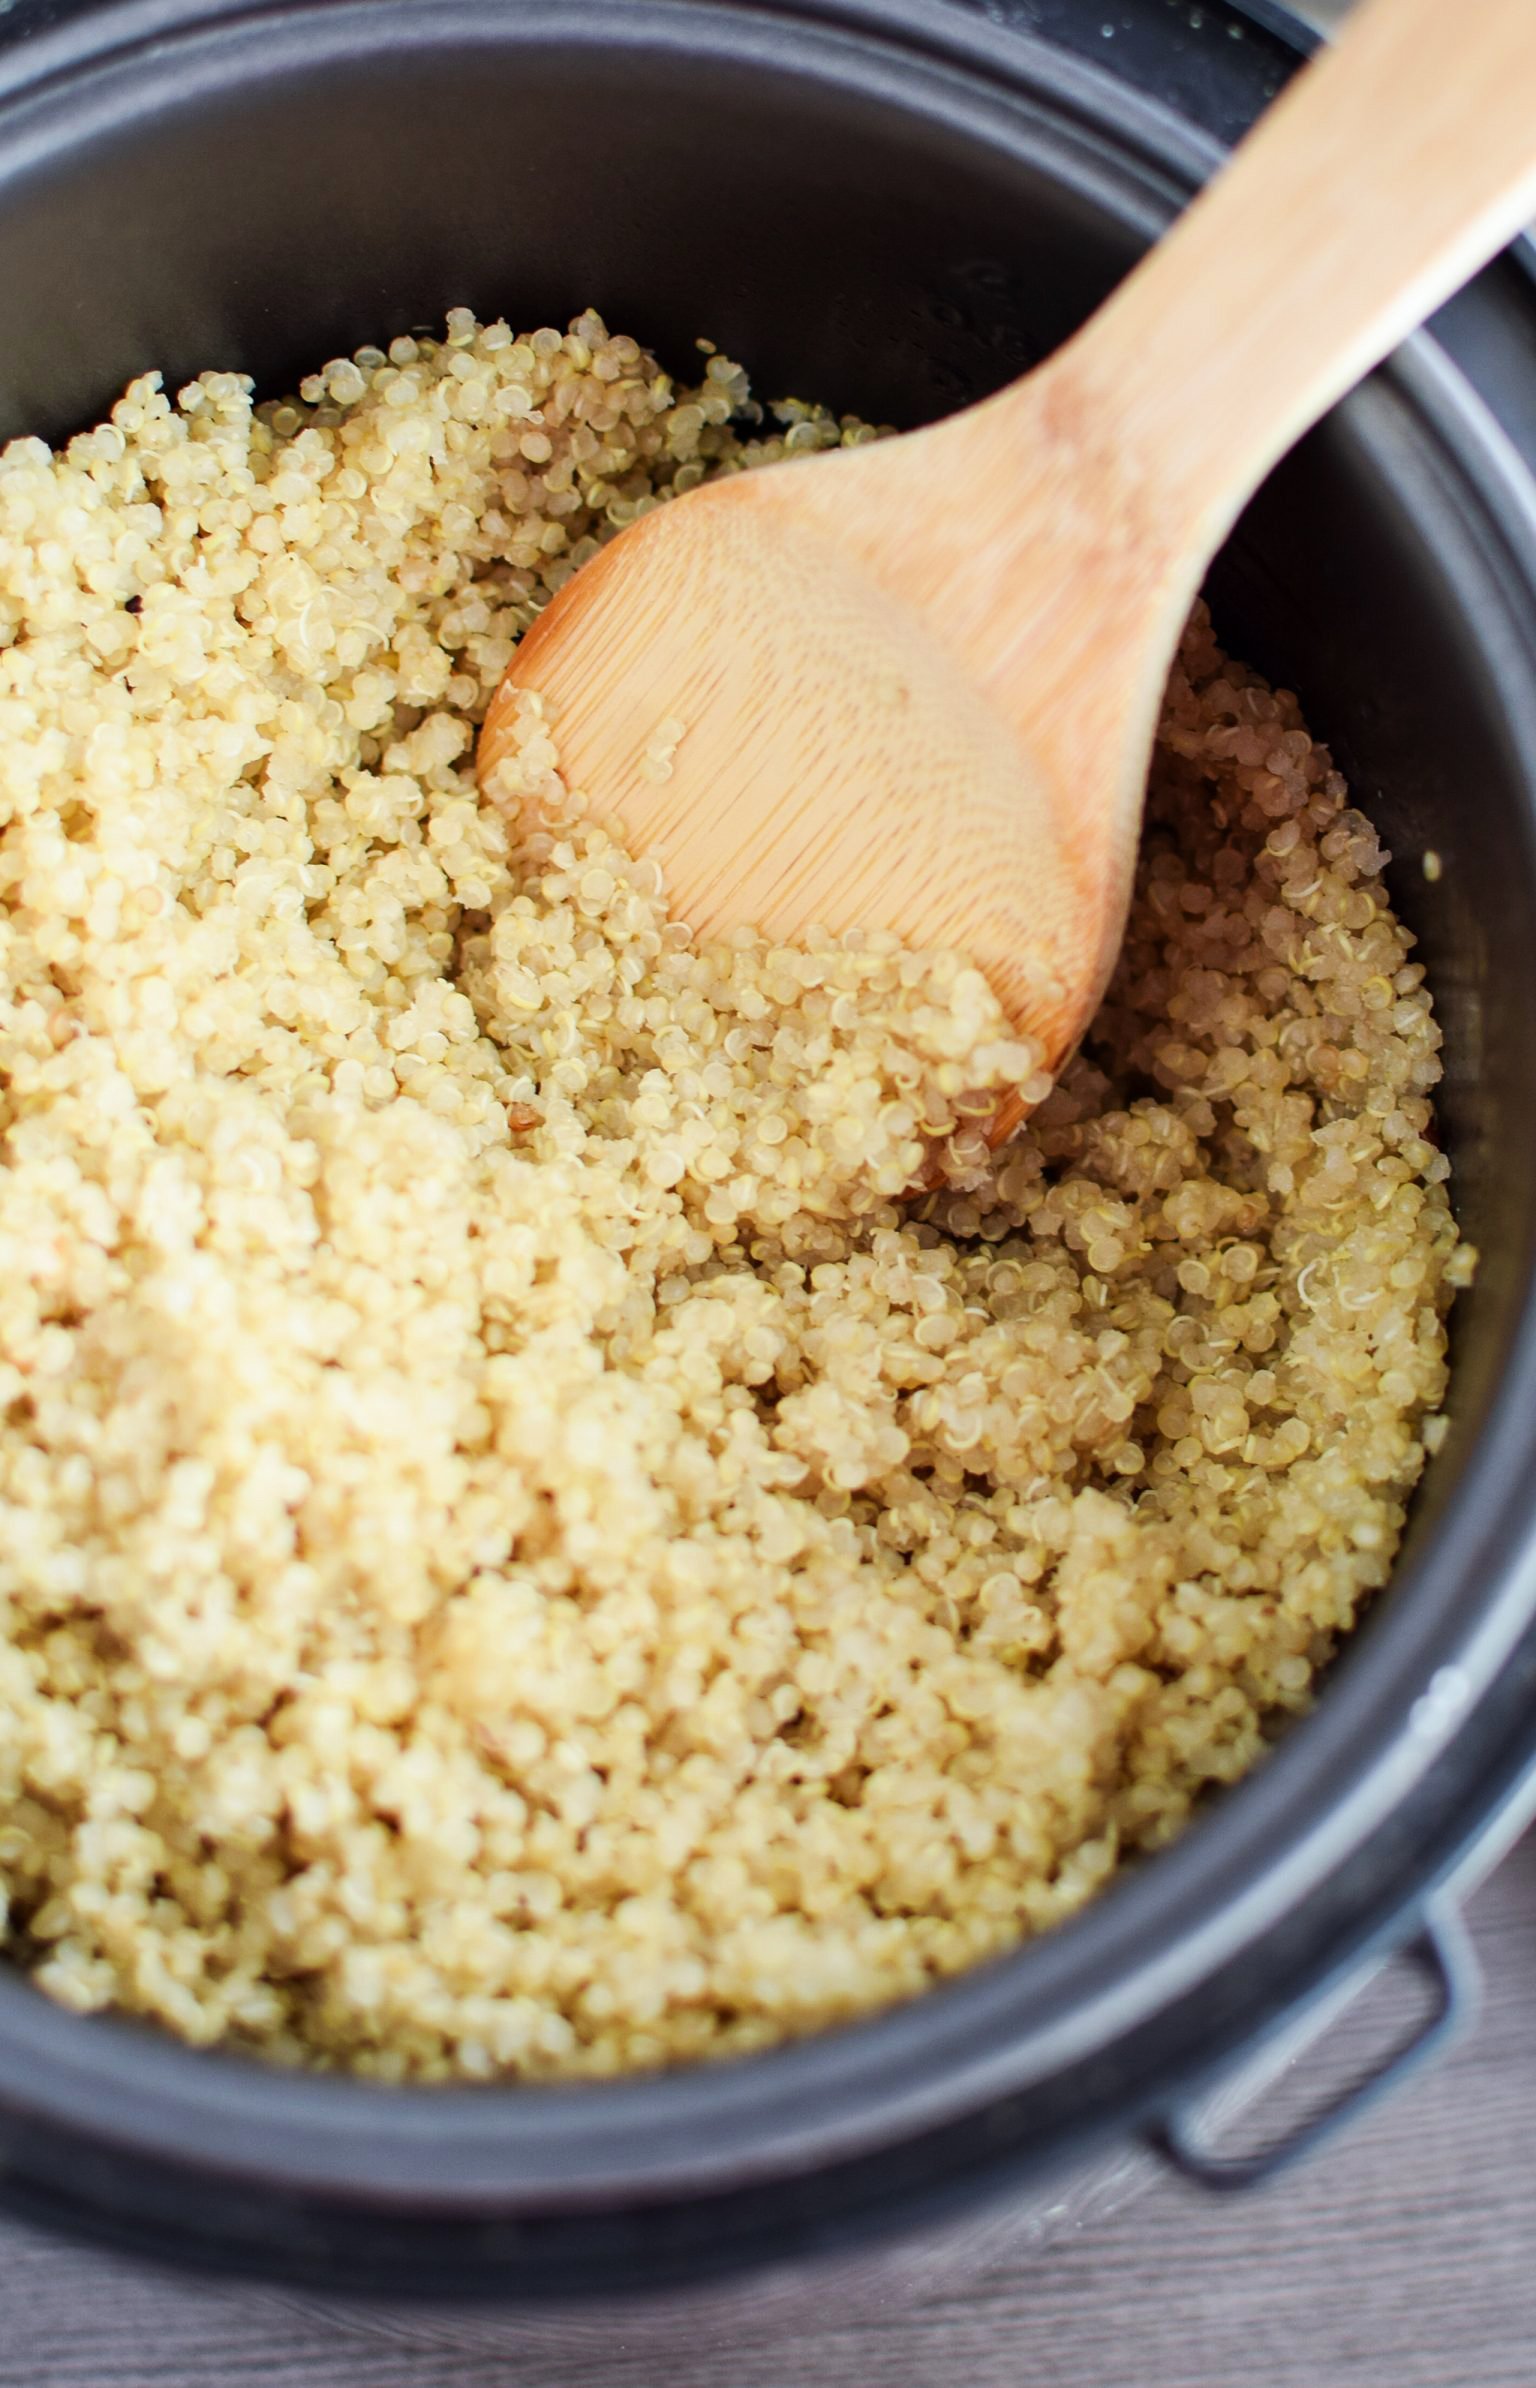 Quinoa cooked in a rice cooker.